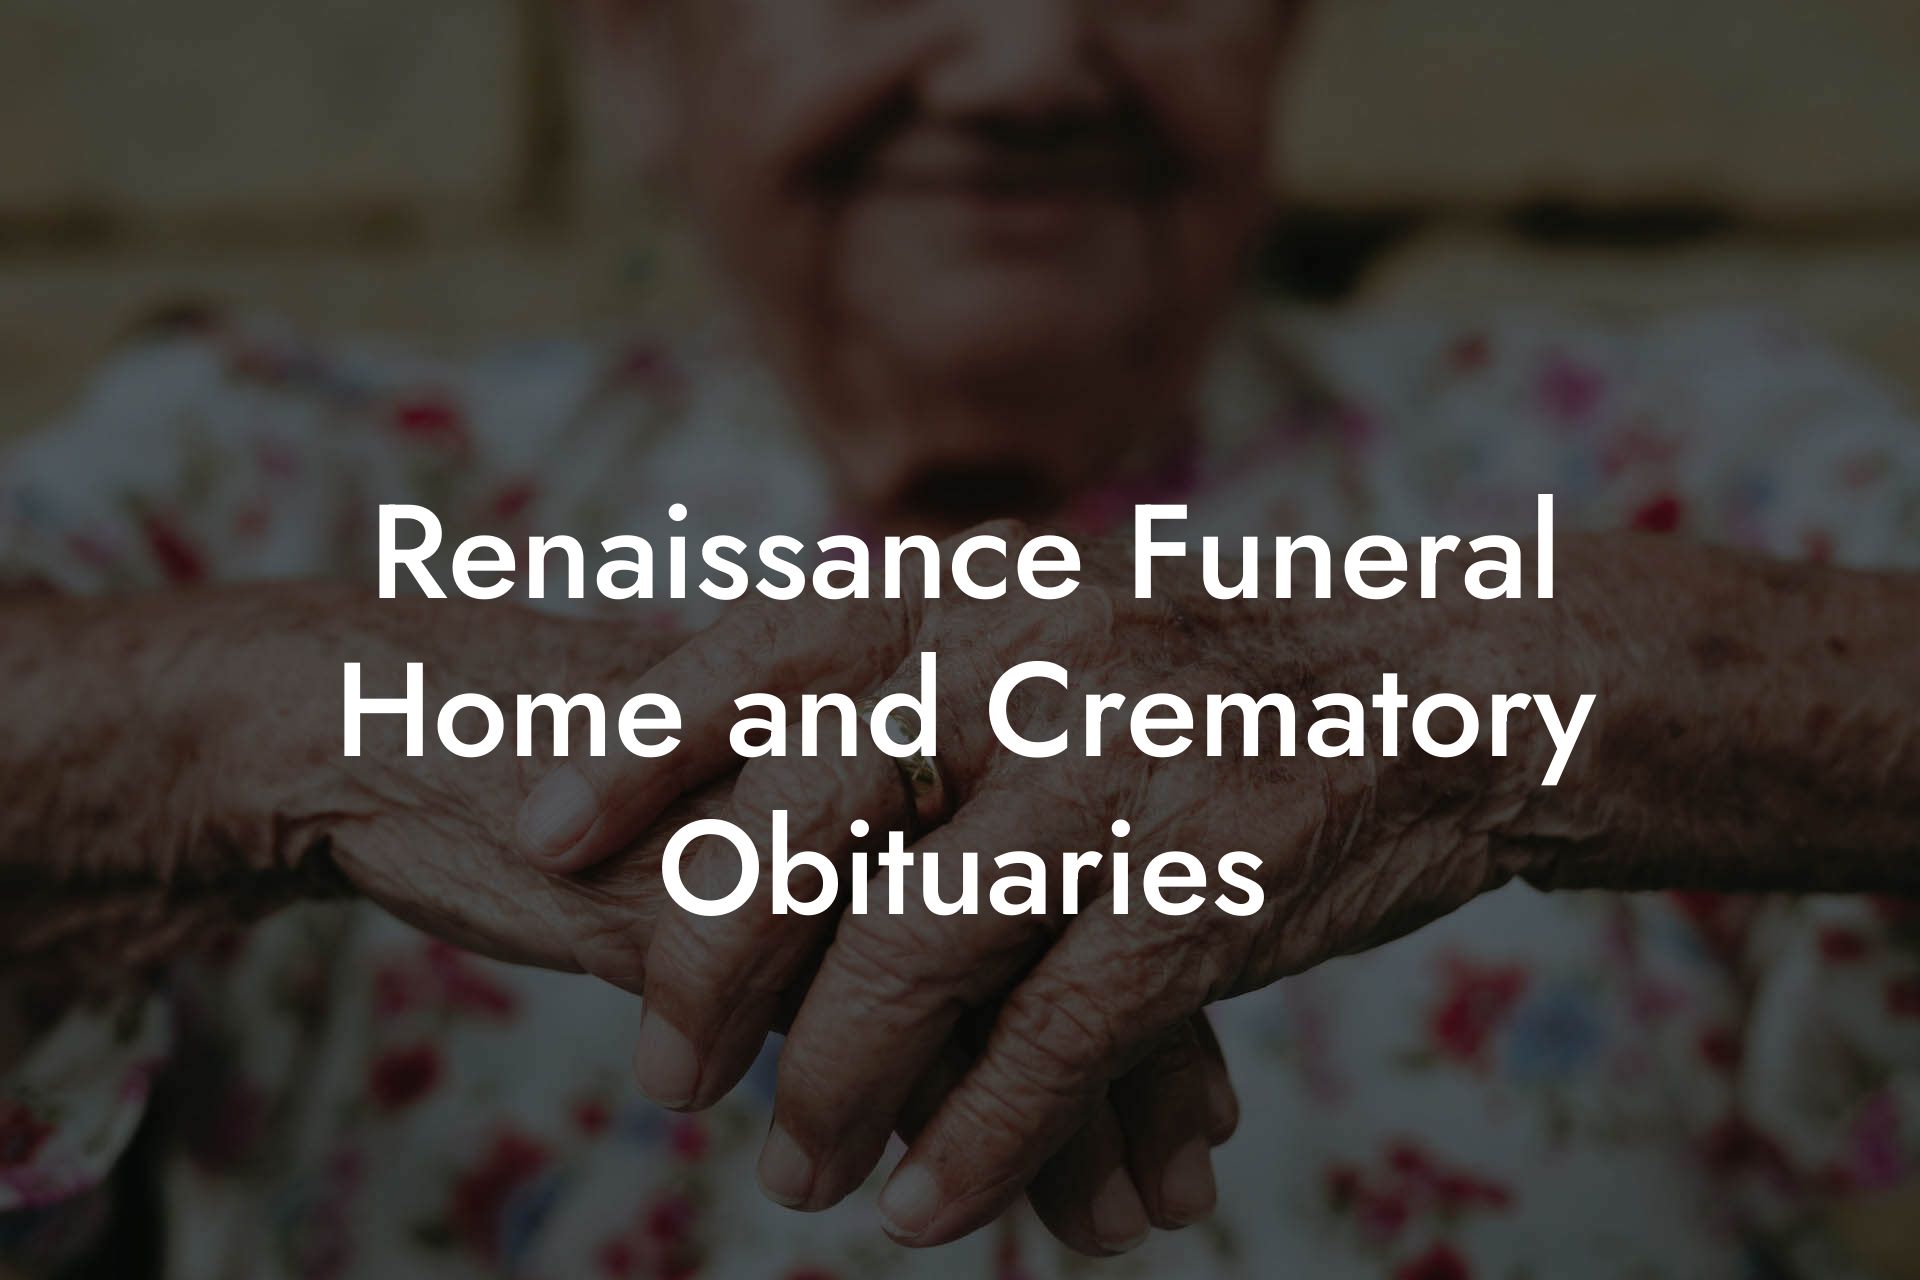 Renaissance Funeral Home and Crematory Obituaries